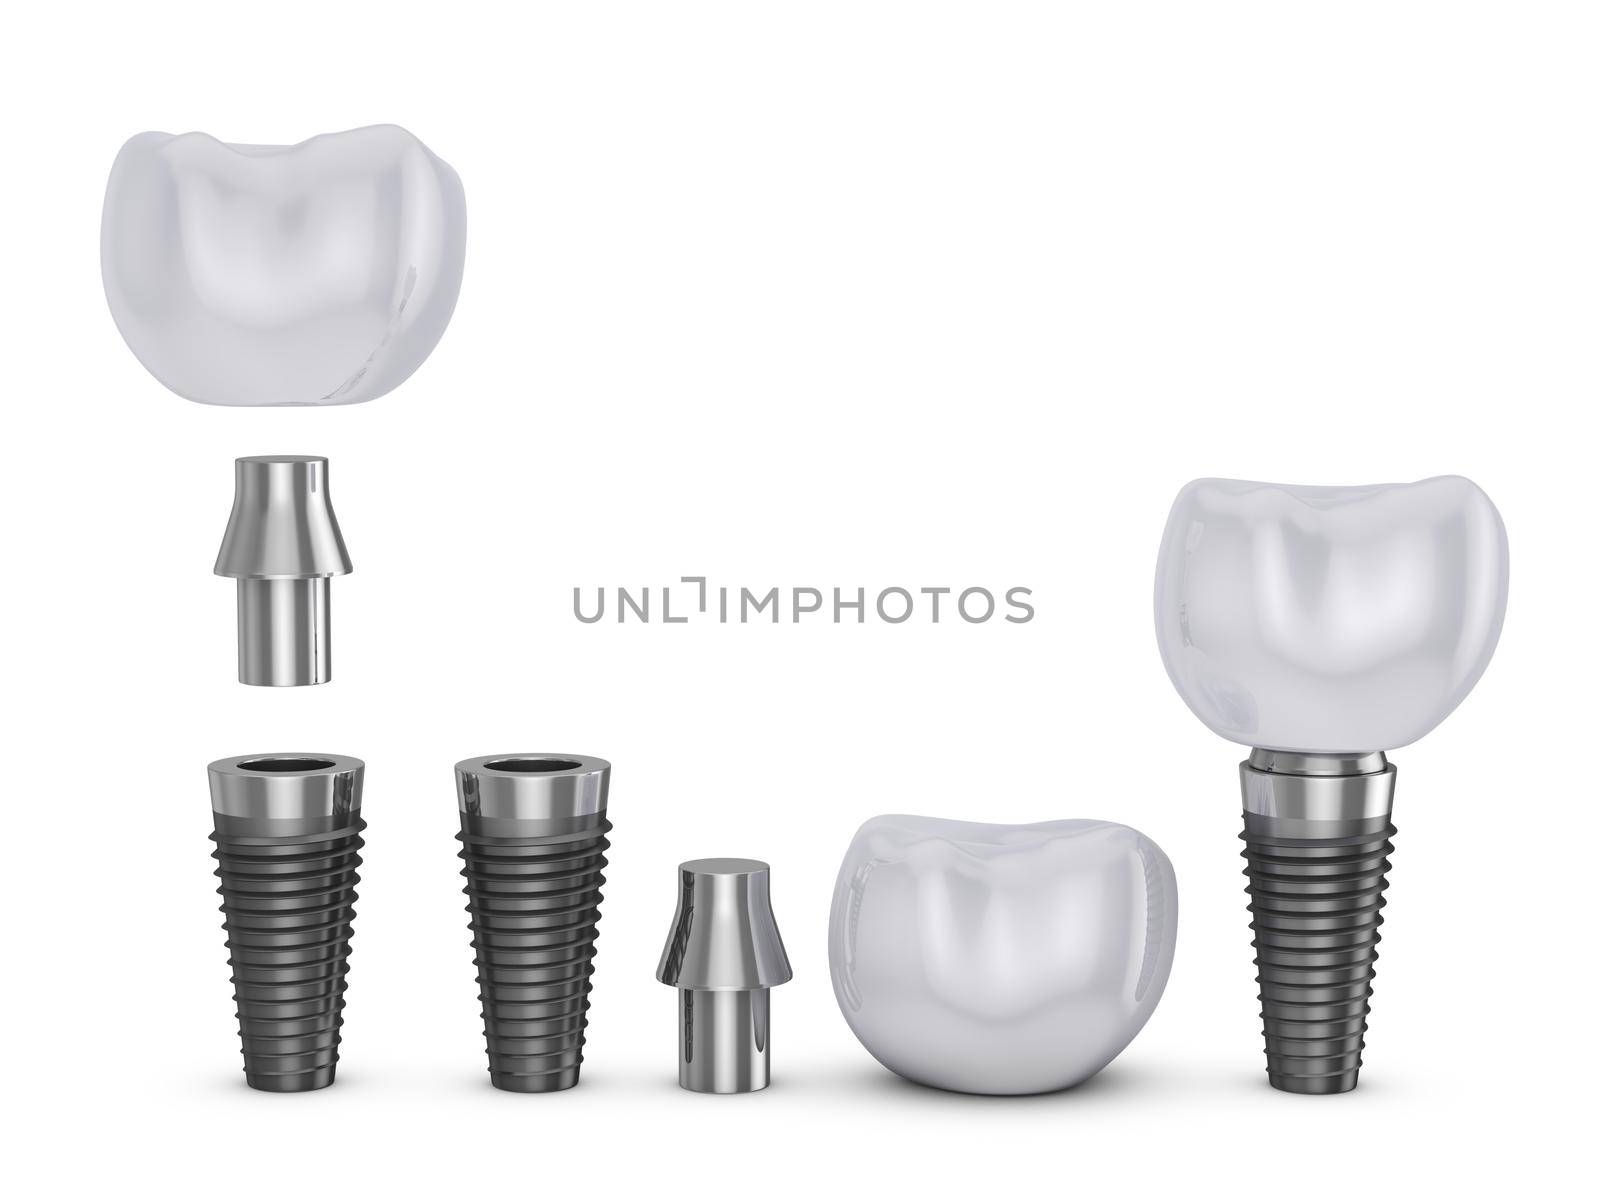 Tooth implant in disassembled form. 3d rendering.